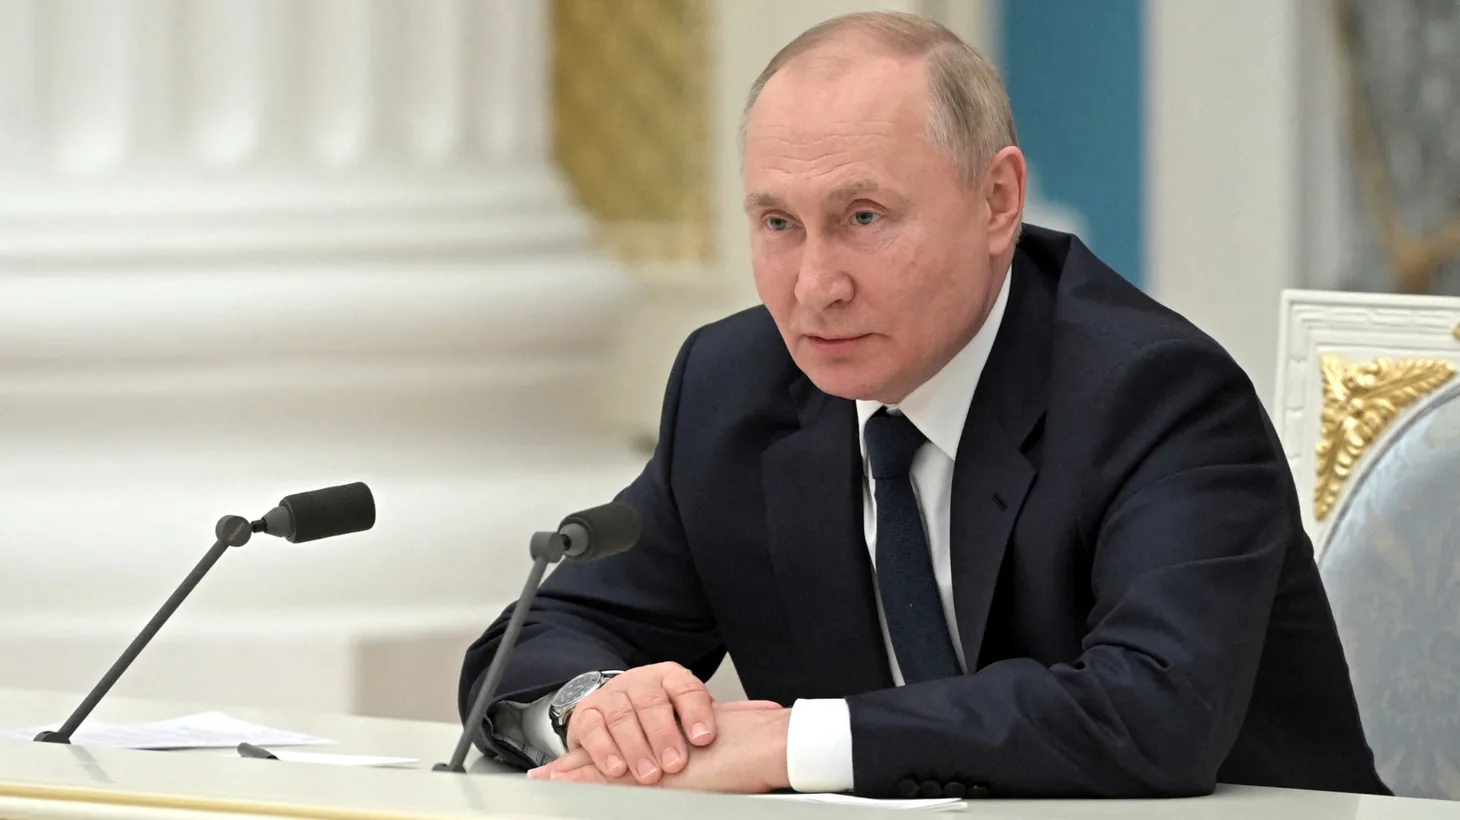 Russian President Vladimir Putin speaks during a meeting with representatives of the business community at the Kremlin in Moscow, Russia on Feb. 24, 2022.